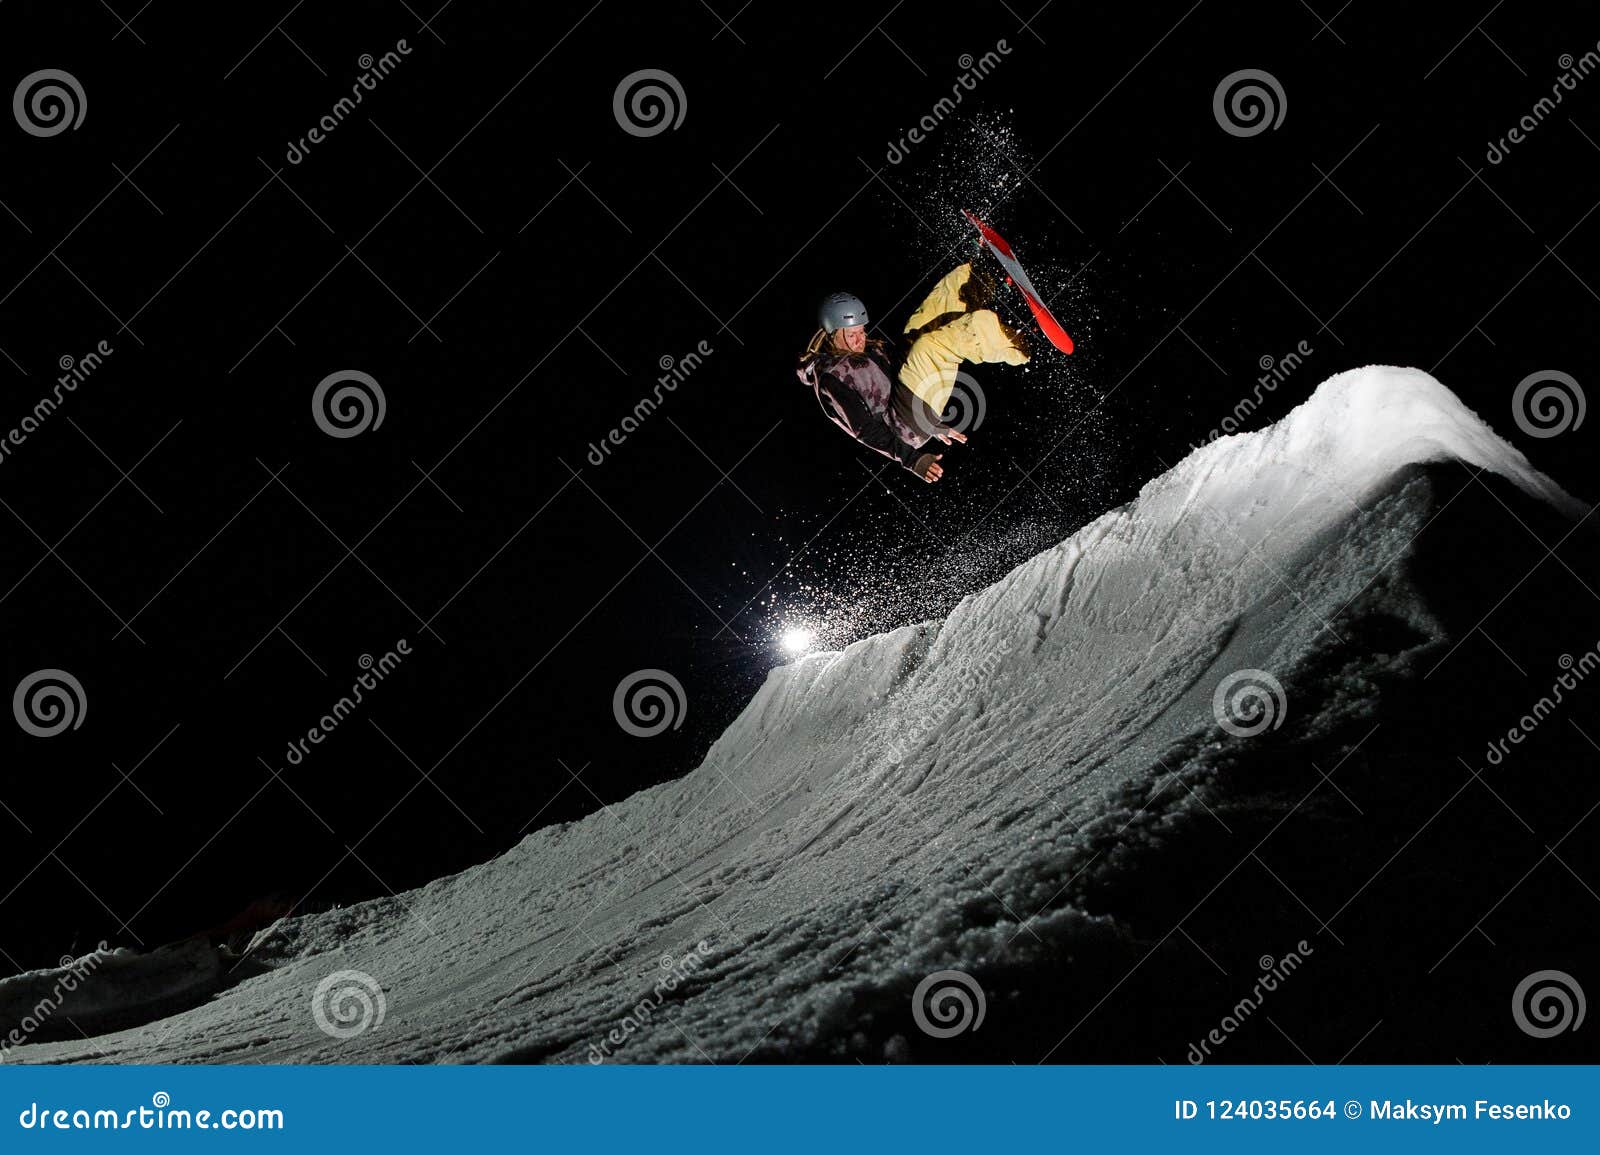 Freeride Snowboarder with Dreadlocks is Jumping in Powder Snow at Night ...